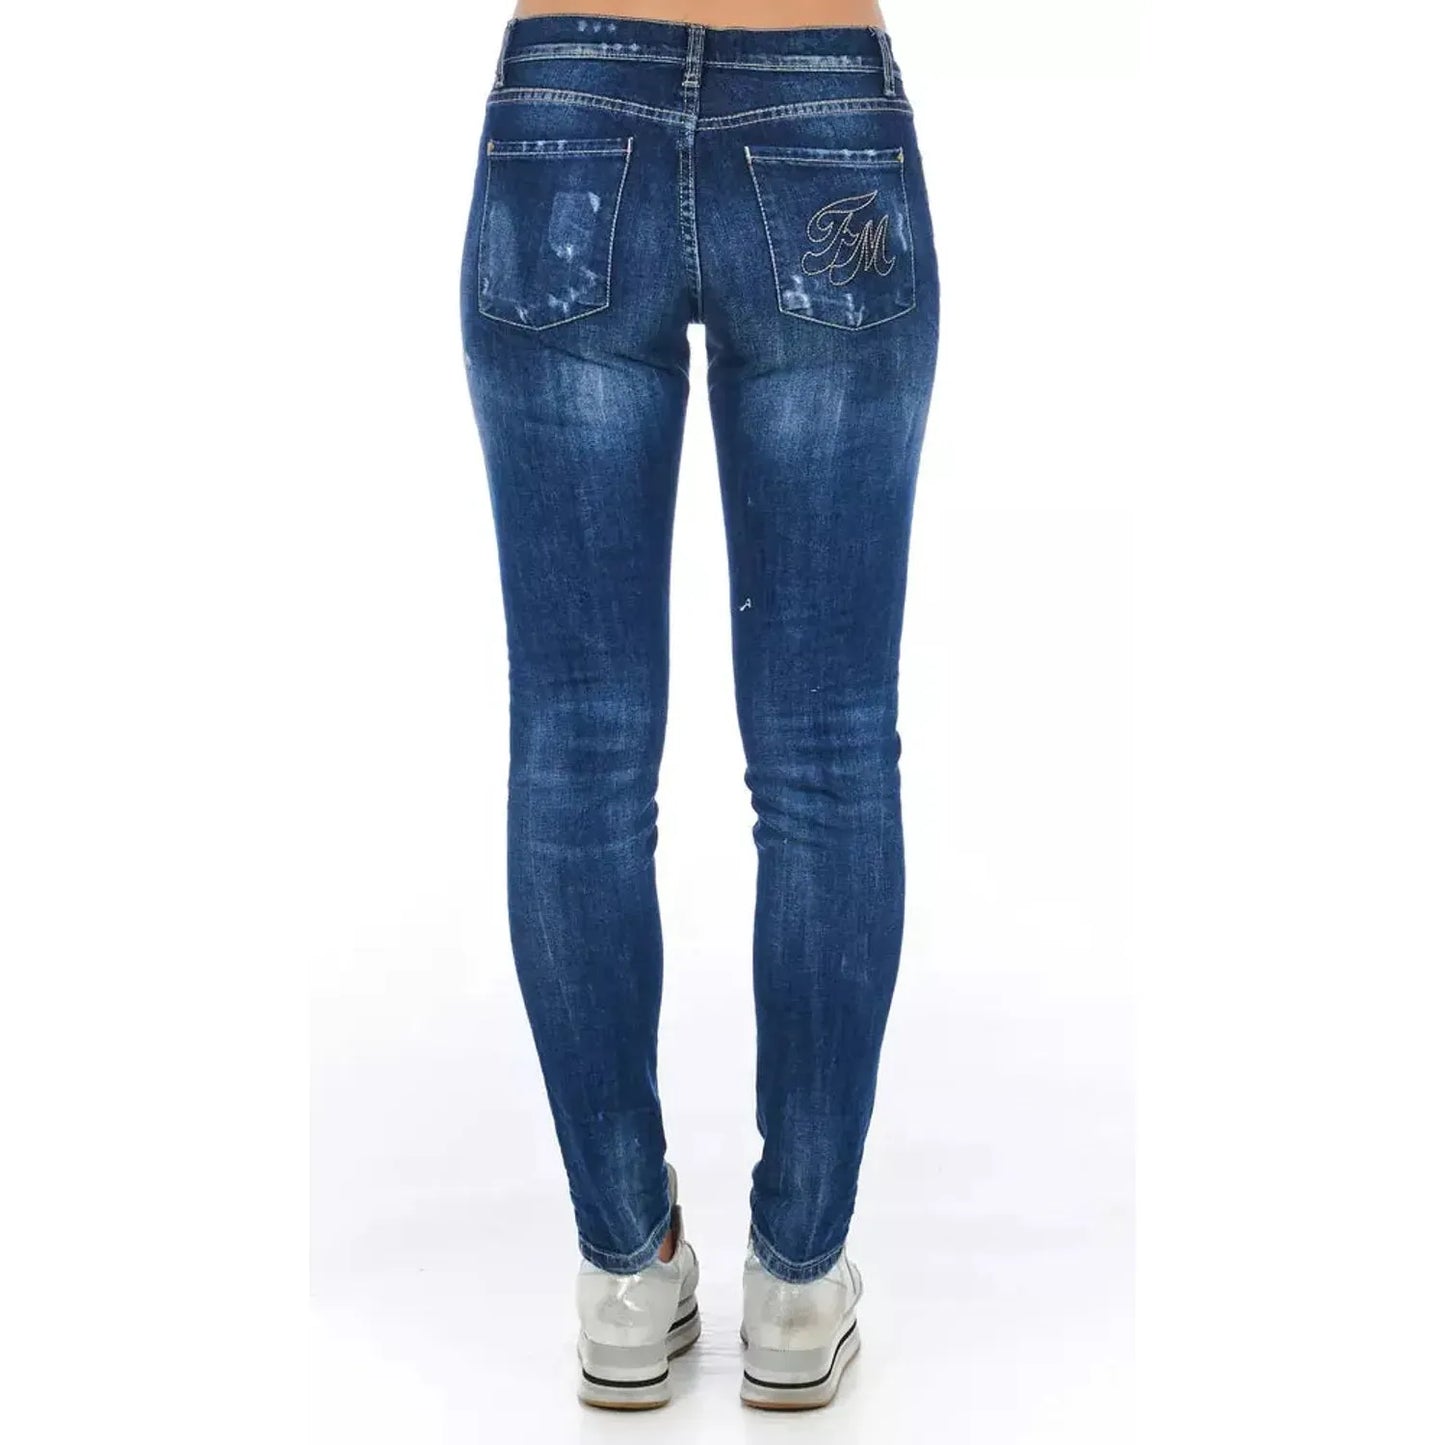 Frankie Morello Chic Worn Wash Skinny Denim Jeans blue-cotton-jeans-pant-52 stock_product_image_21764_1248758629-22-8a199358-7ff.webp